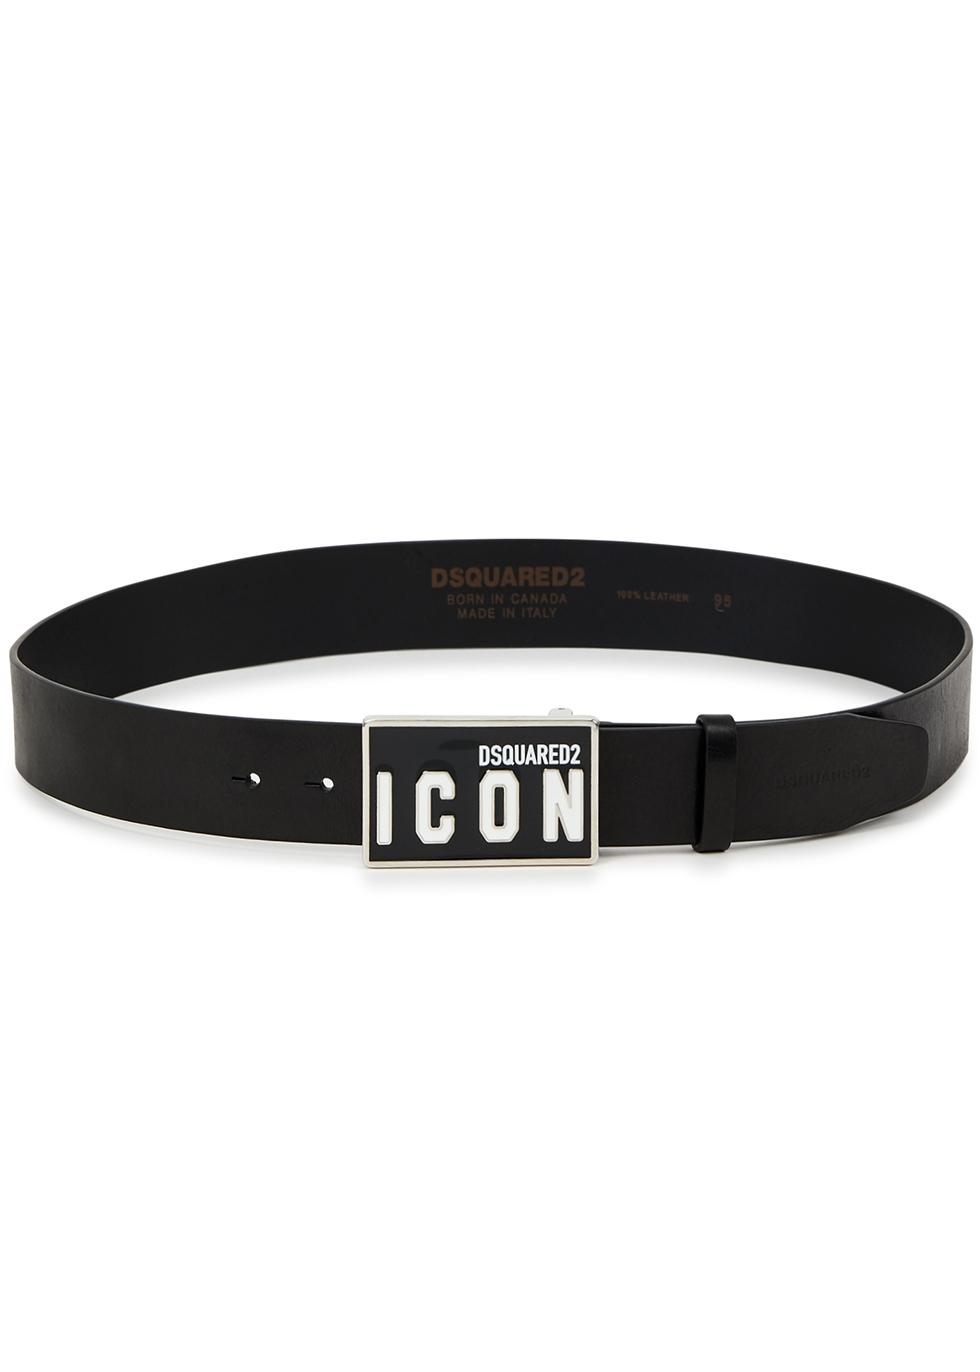 DSquared² Icon Leather Belt in Black for Men | Lyst